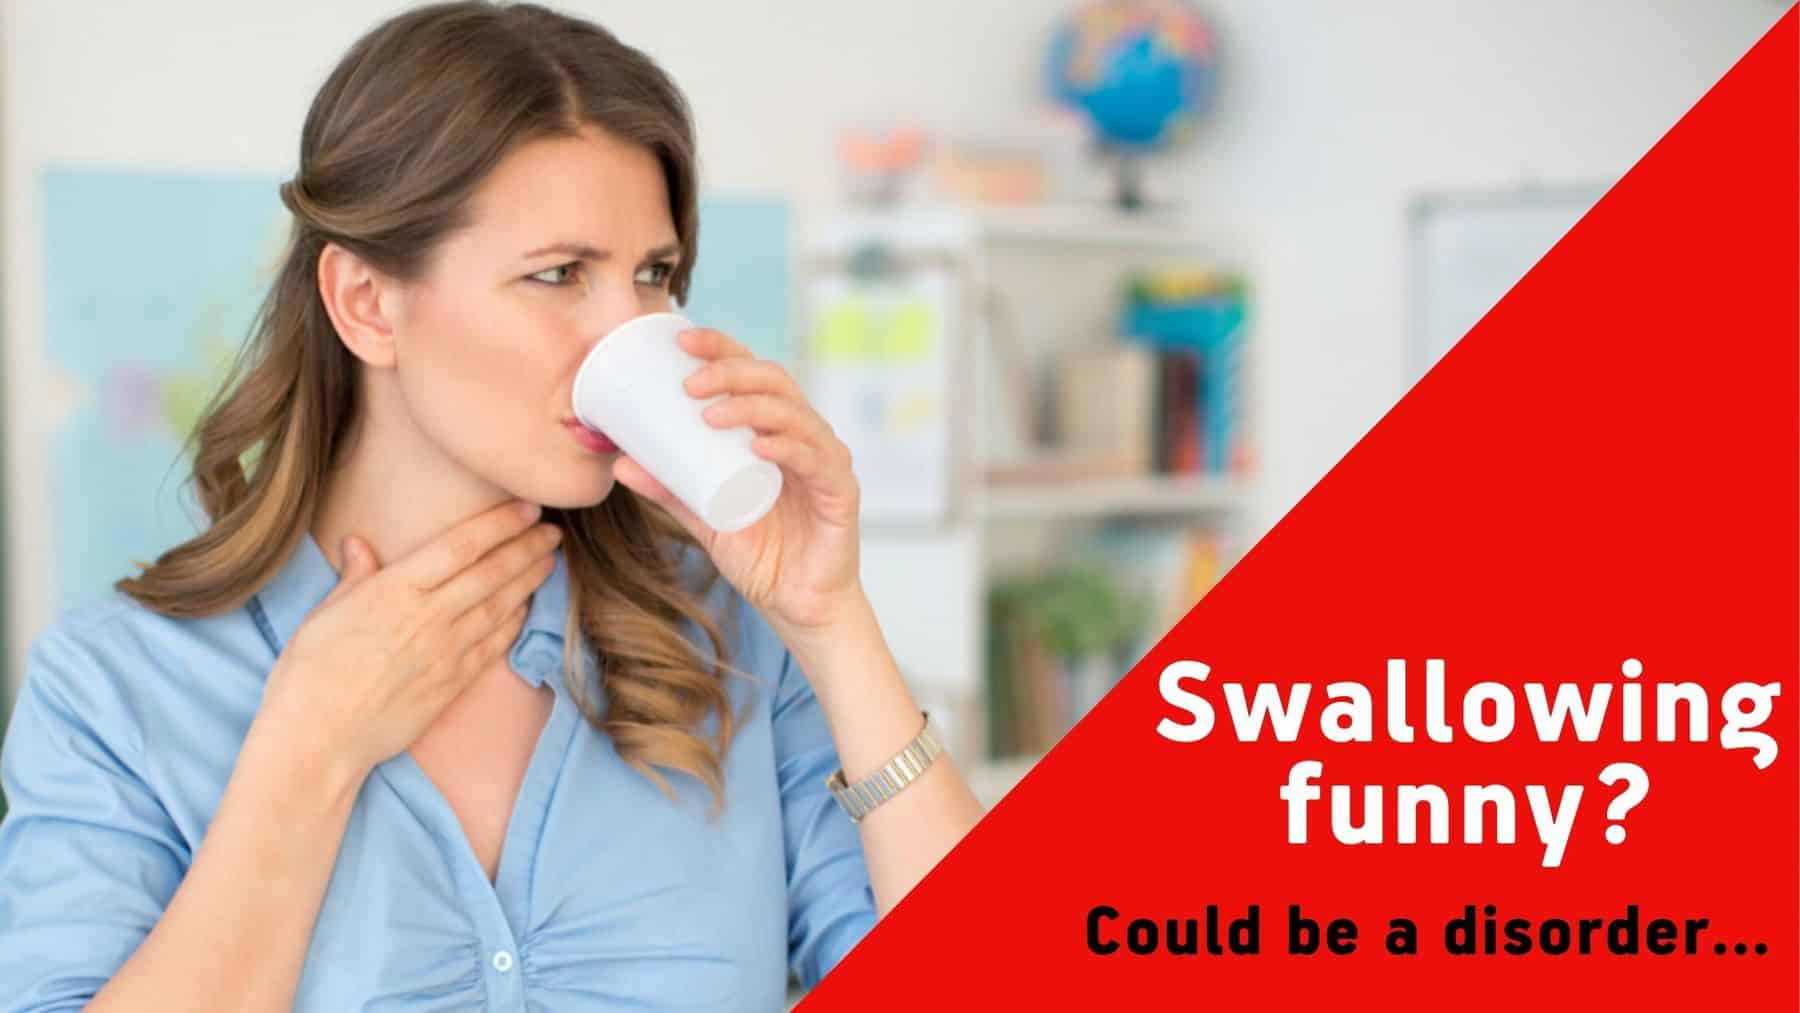 Woman with swallowing trouble